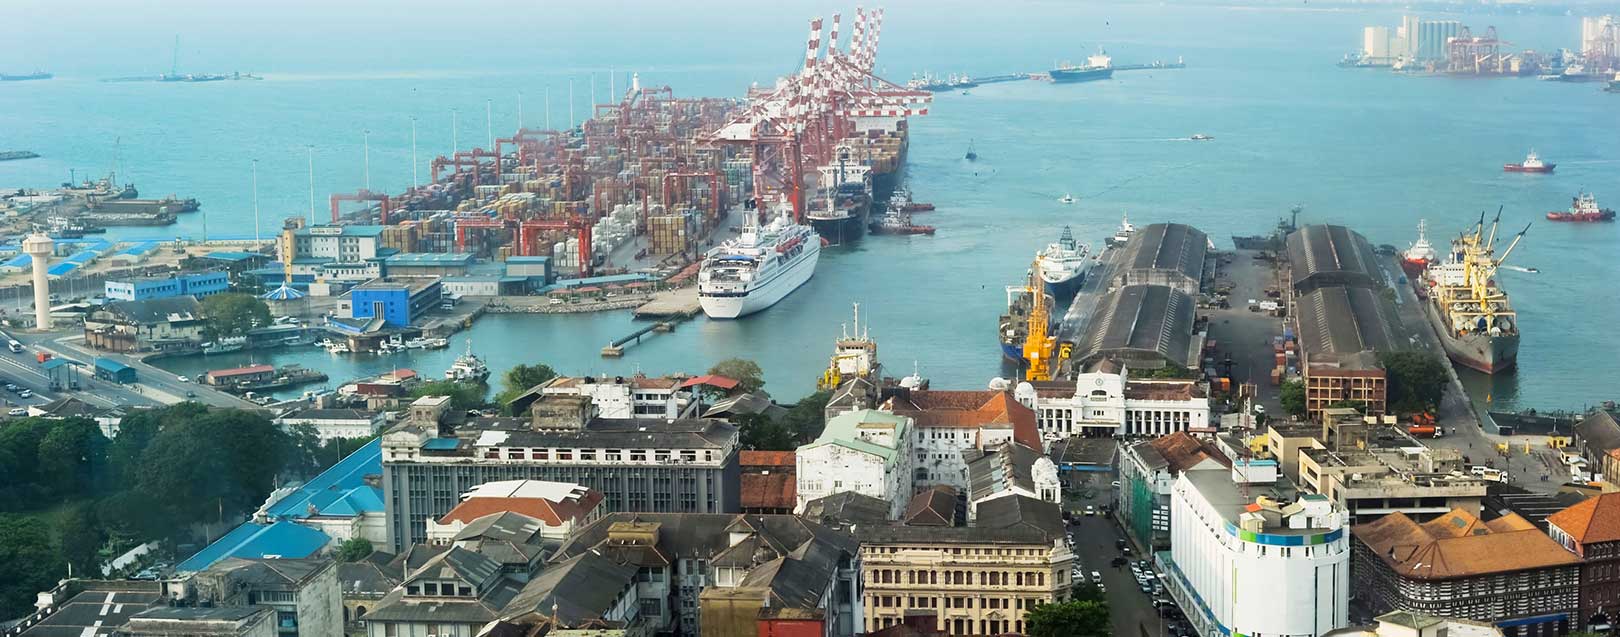 Lankan cabinet clears Chinese port deal